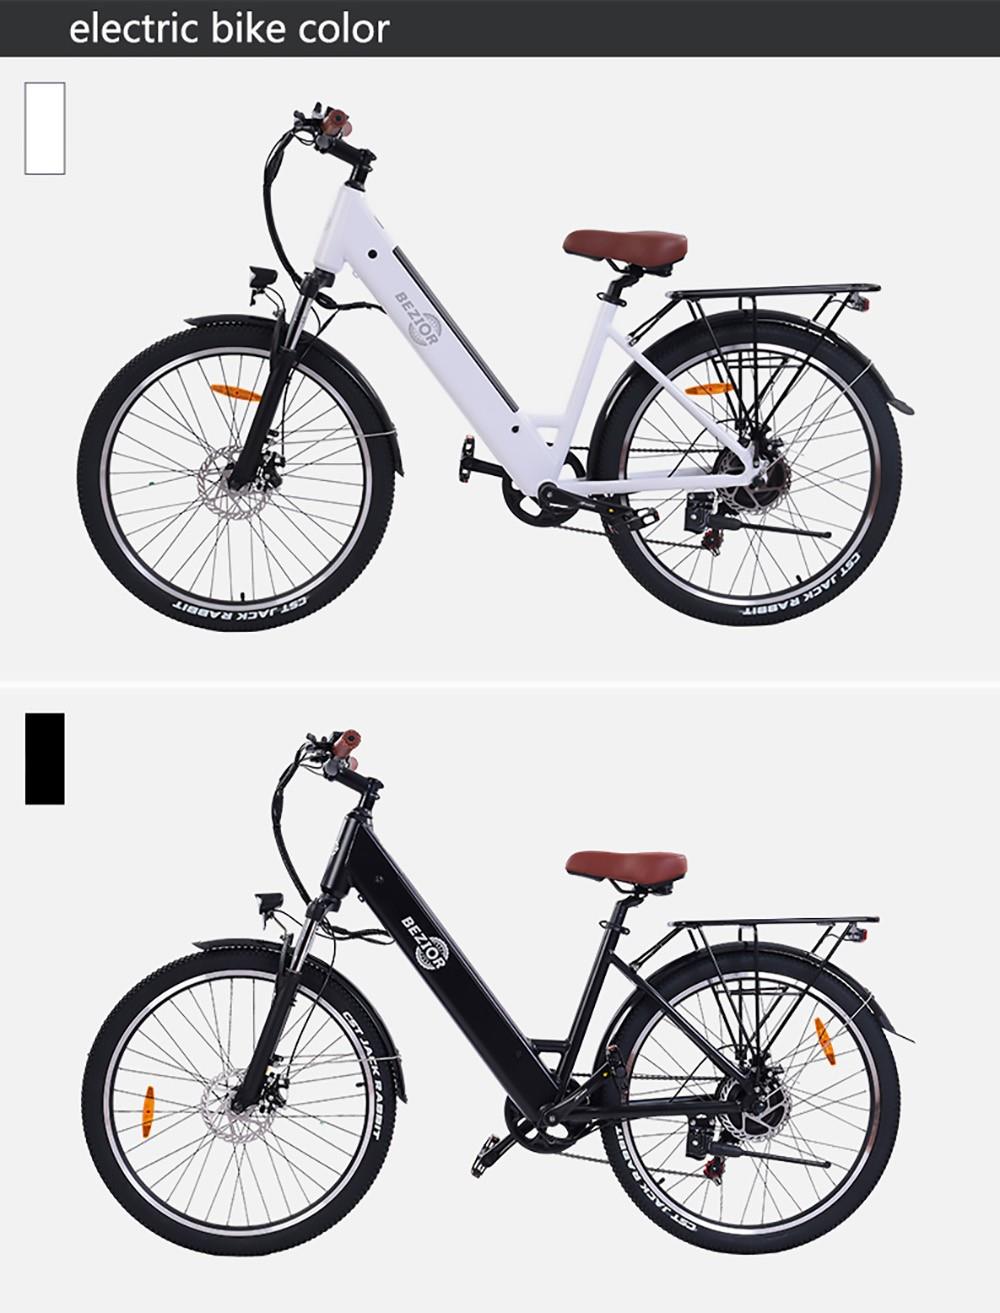 BEZIOR M3 26*2.1 Inch CST Tires Electric Bike, 48V 500W Motor, 10.4Ah Battery, Max Speed 32km/h - White